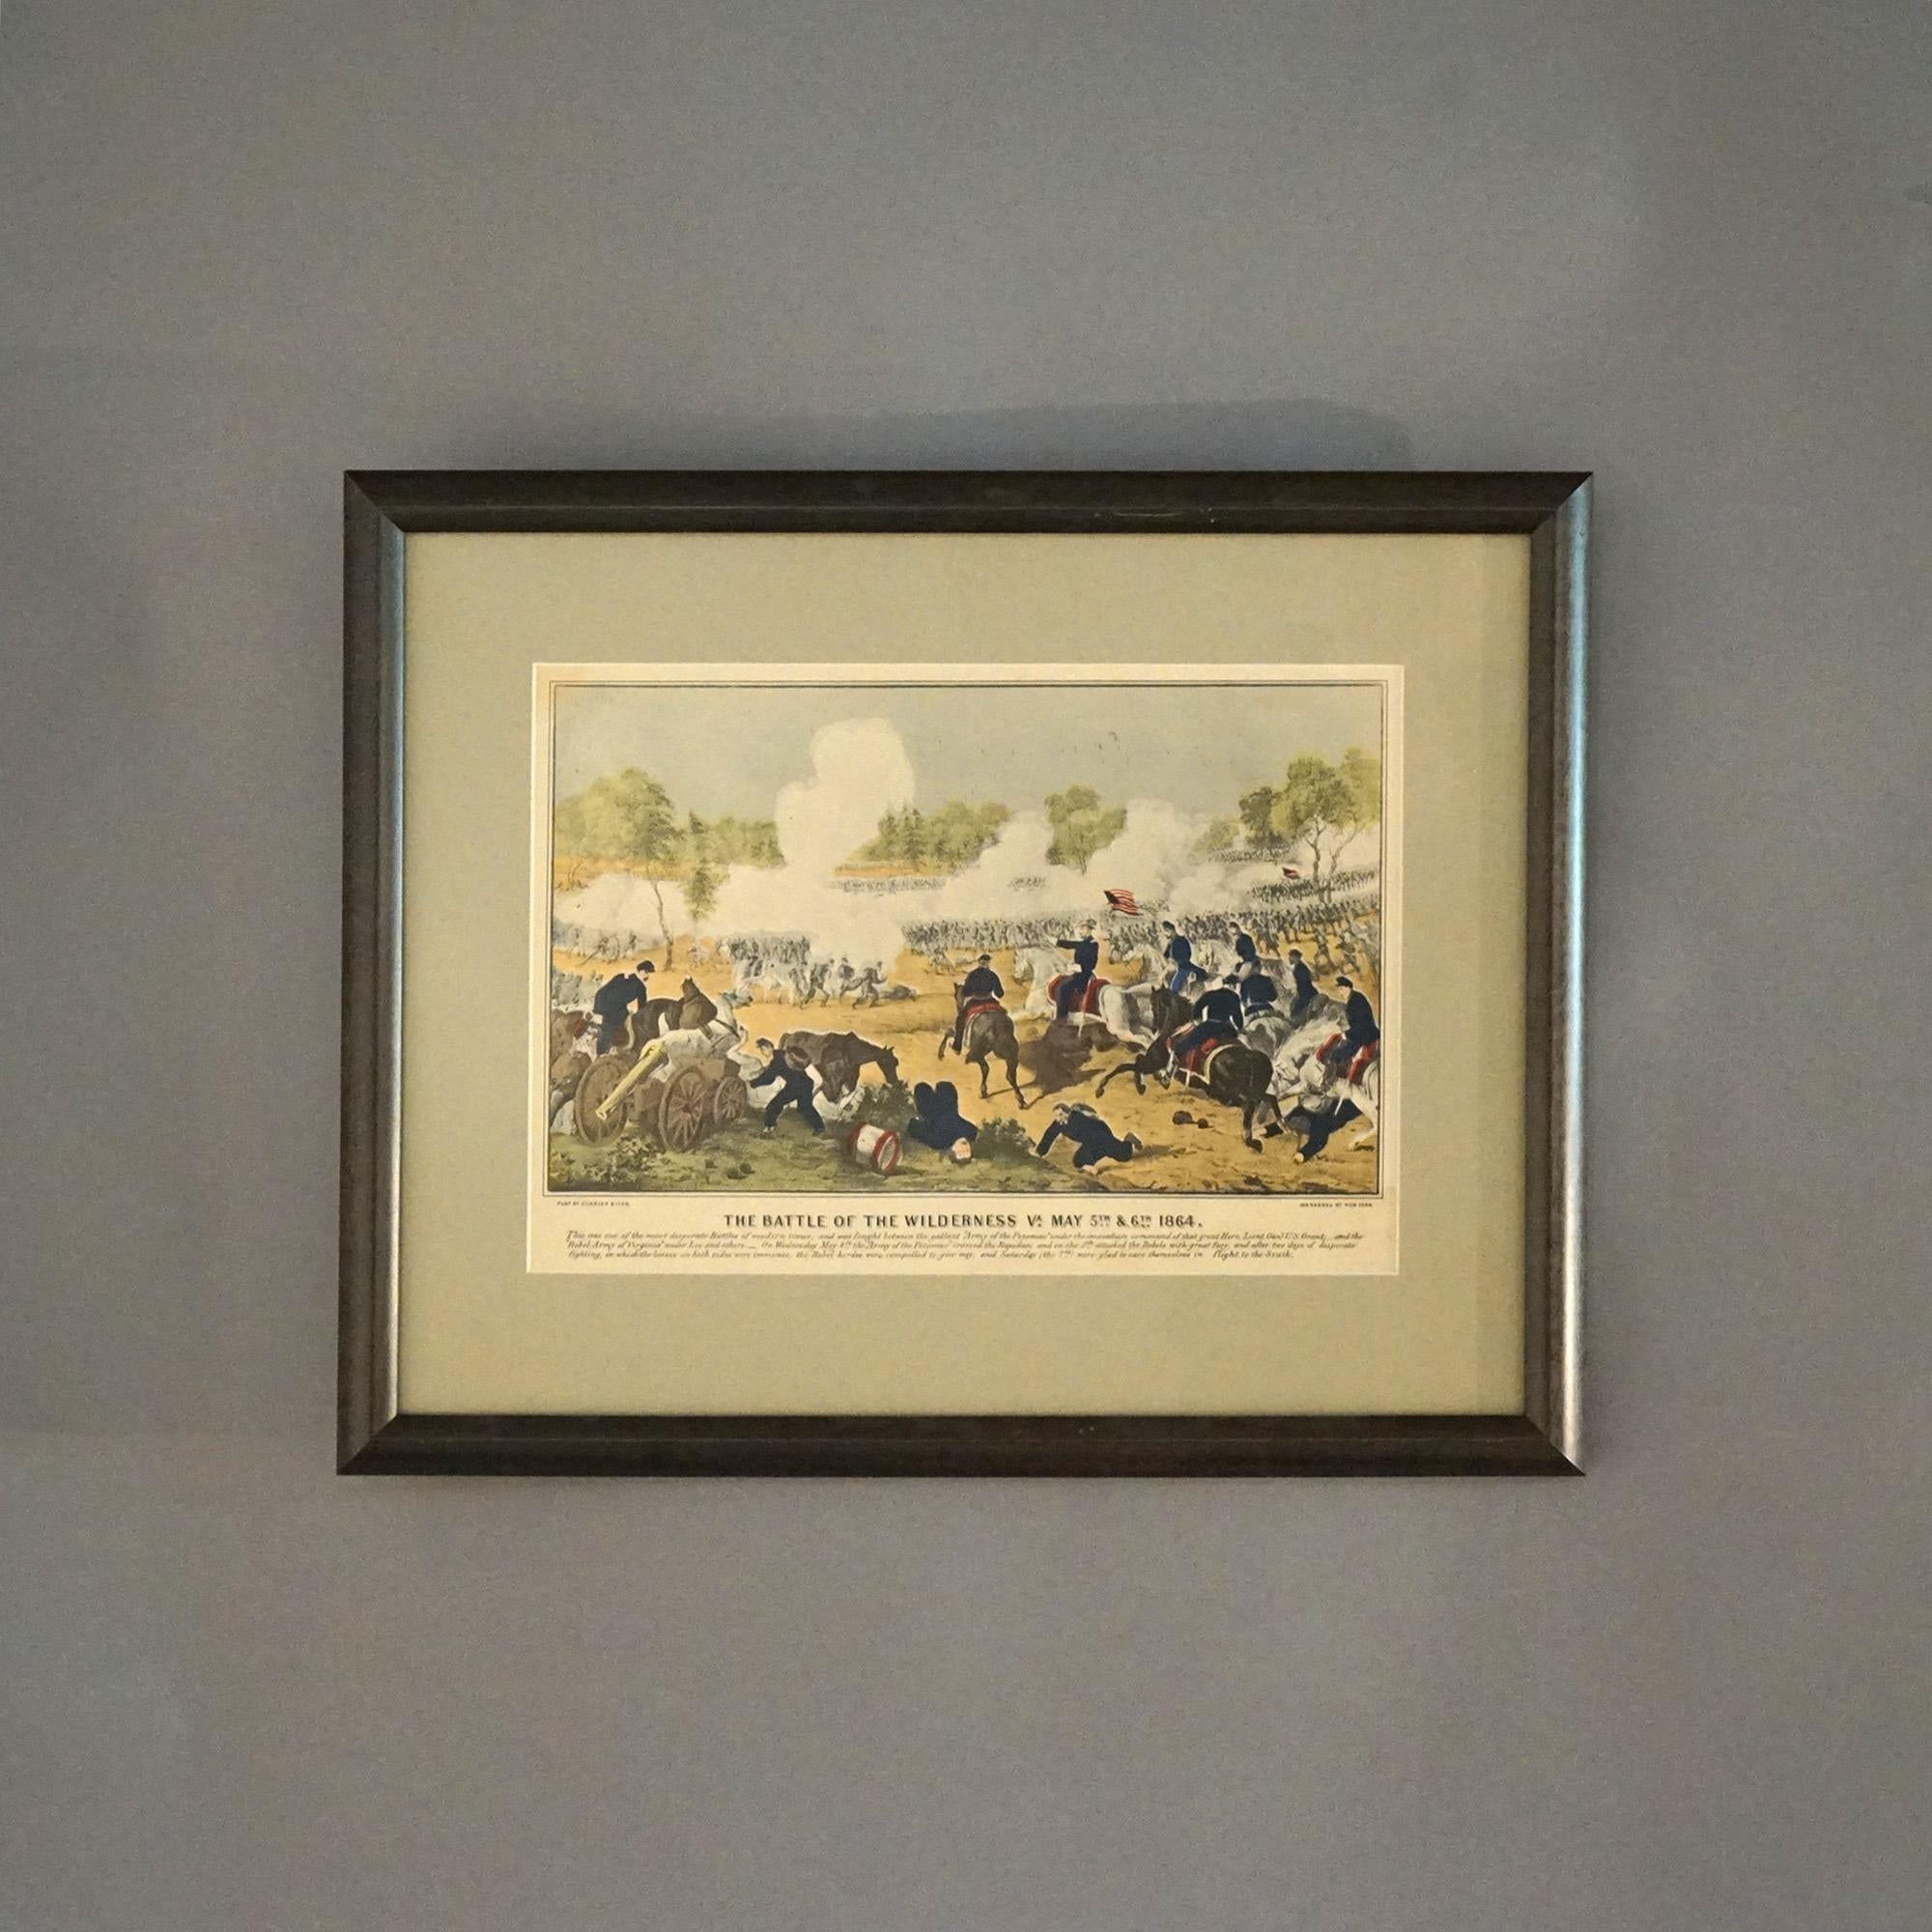 Antique Currier & Ives Civil War Lithograph “The Battle Of The Wilderness” Dated 1864, Framed

Measures - 15.75